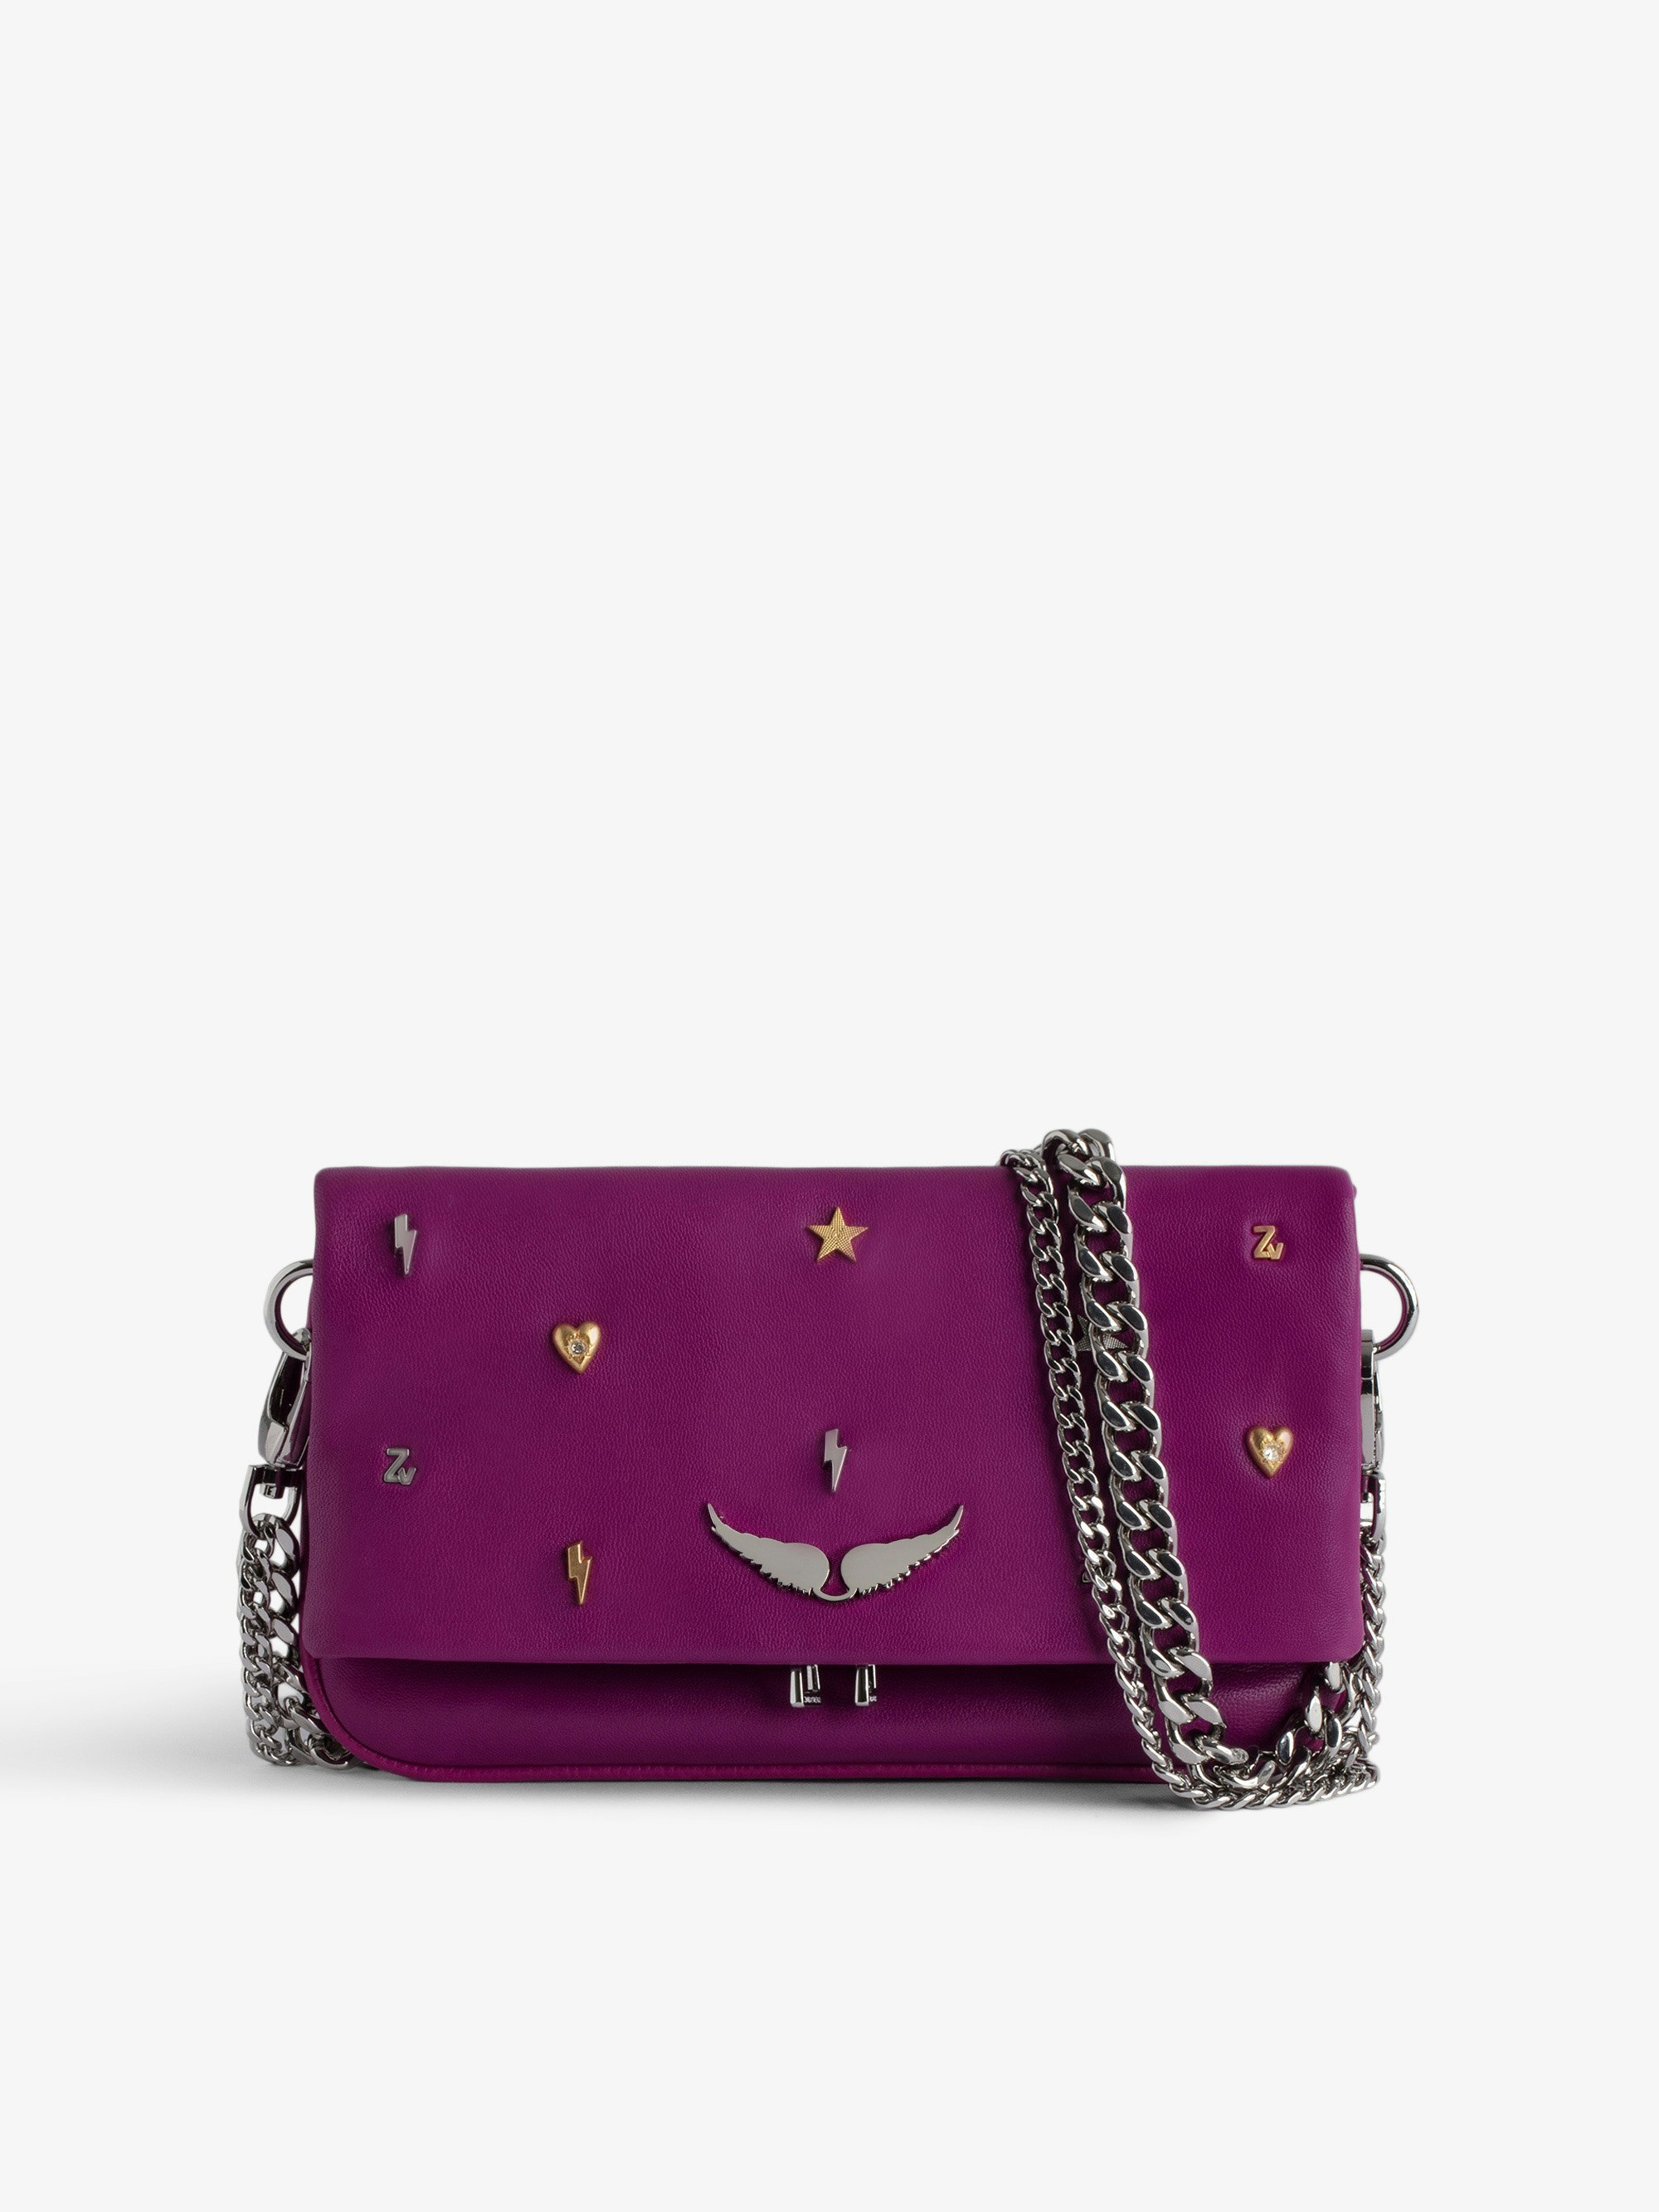 Rock Nano Lucky Charms Clutch - Women’s small purple grained leather clutch with chain straps, charms, and wings.